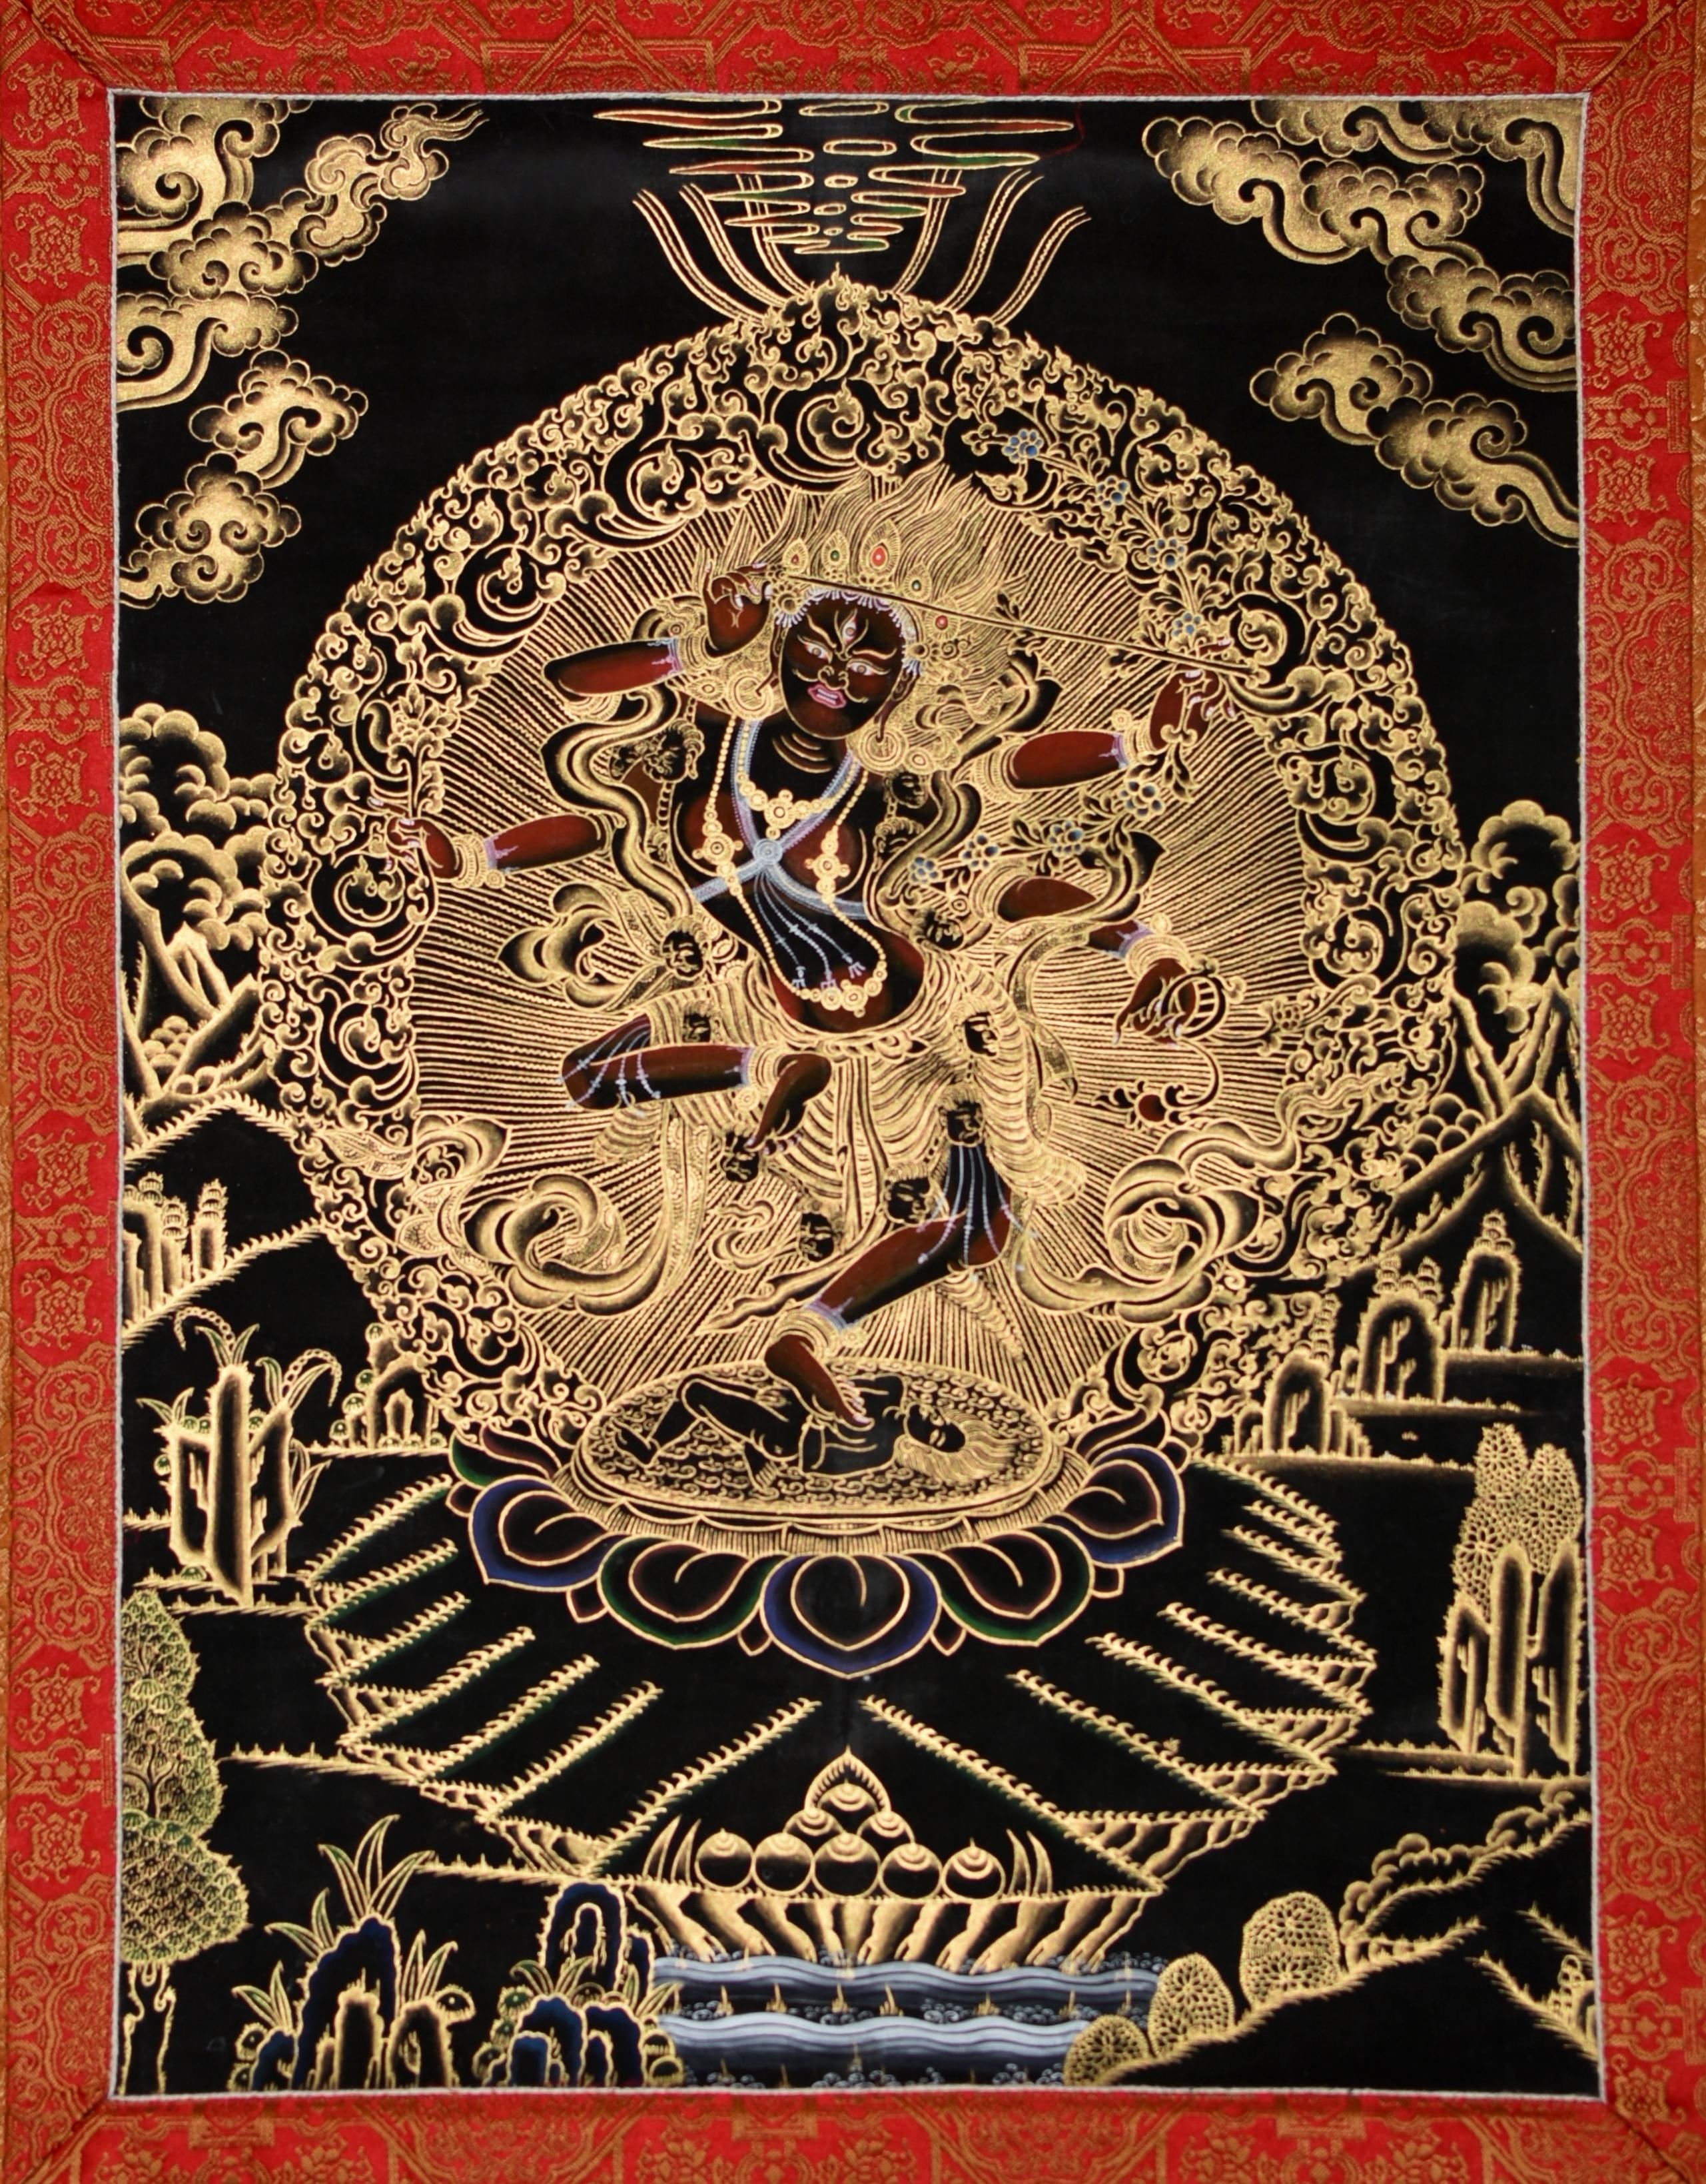 A sublime, rare Thangka of Goddess Kurukulla, the Red Tara, finely portraited by a master artist in Nepal. Kurukulla comes to the aid of love and relationships by compassionately leading the partners to the path of united harmony. In this special